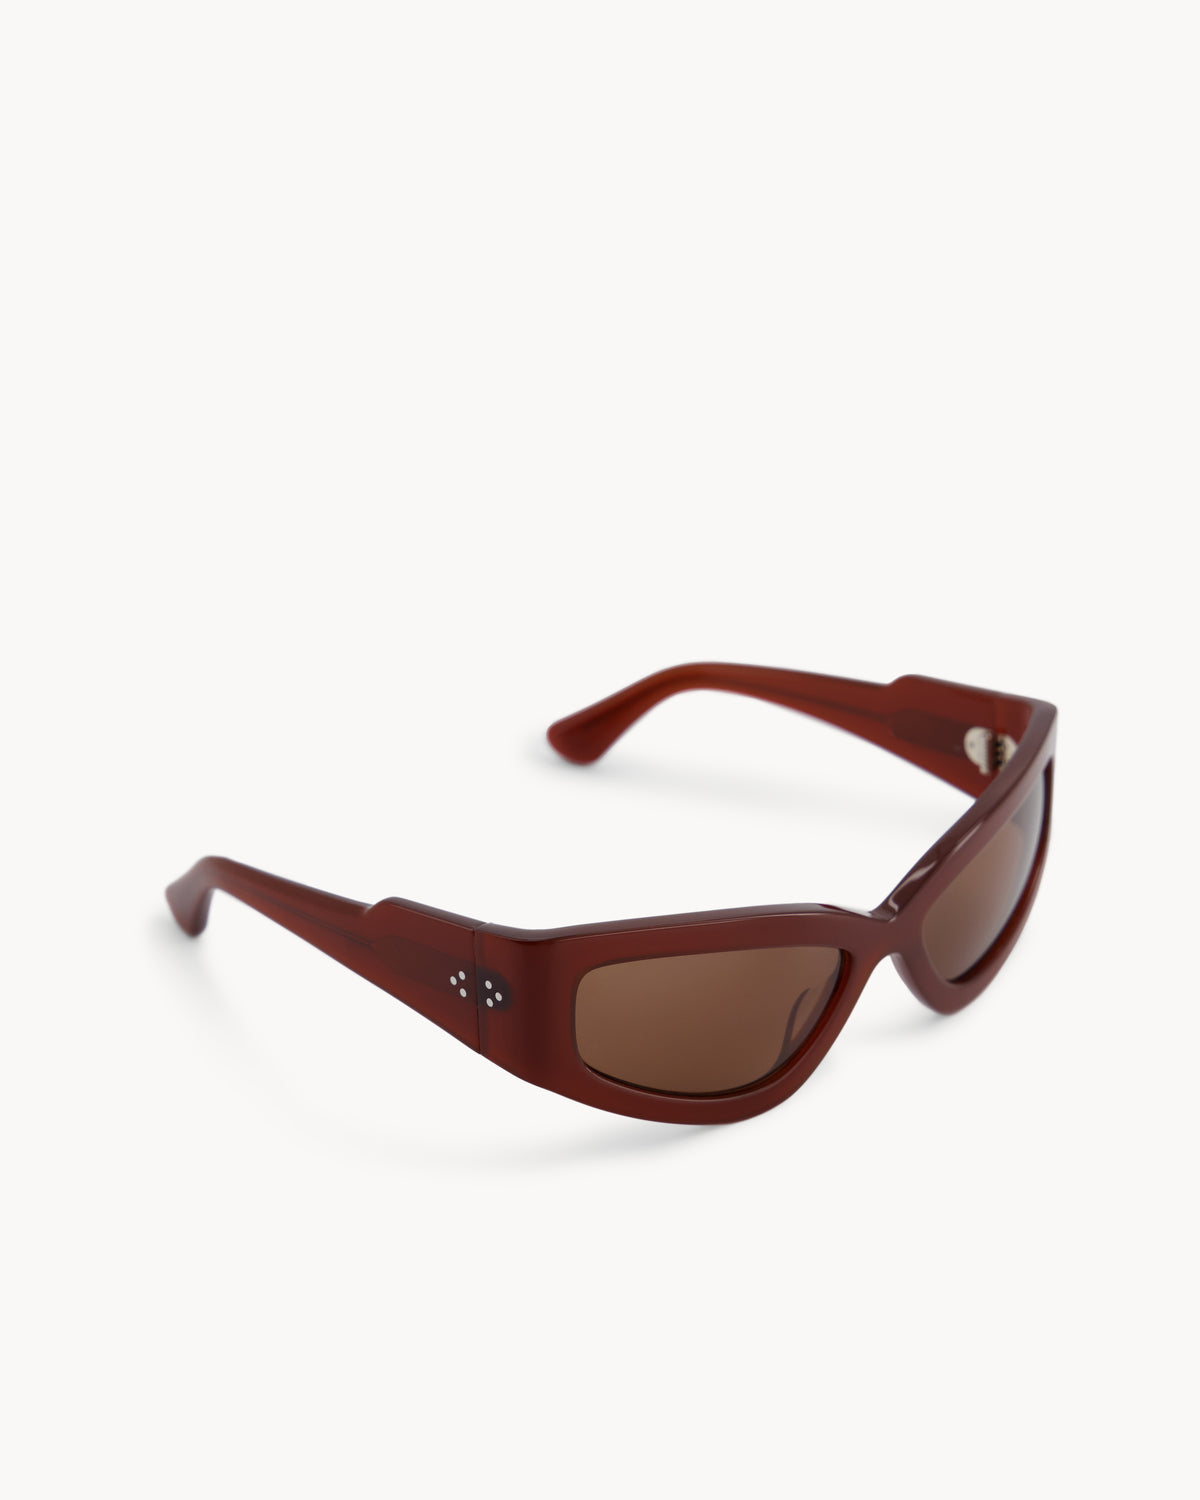 Port Tanger Shyan Sunglasses in Terracotta Acetate and Tobacco Lenses 2